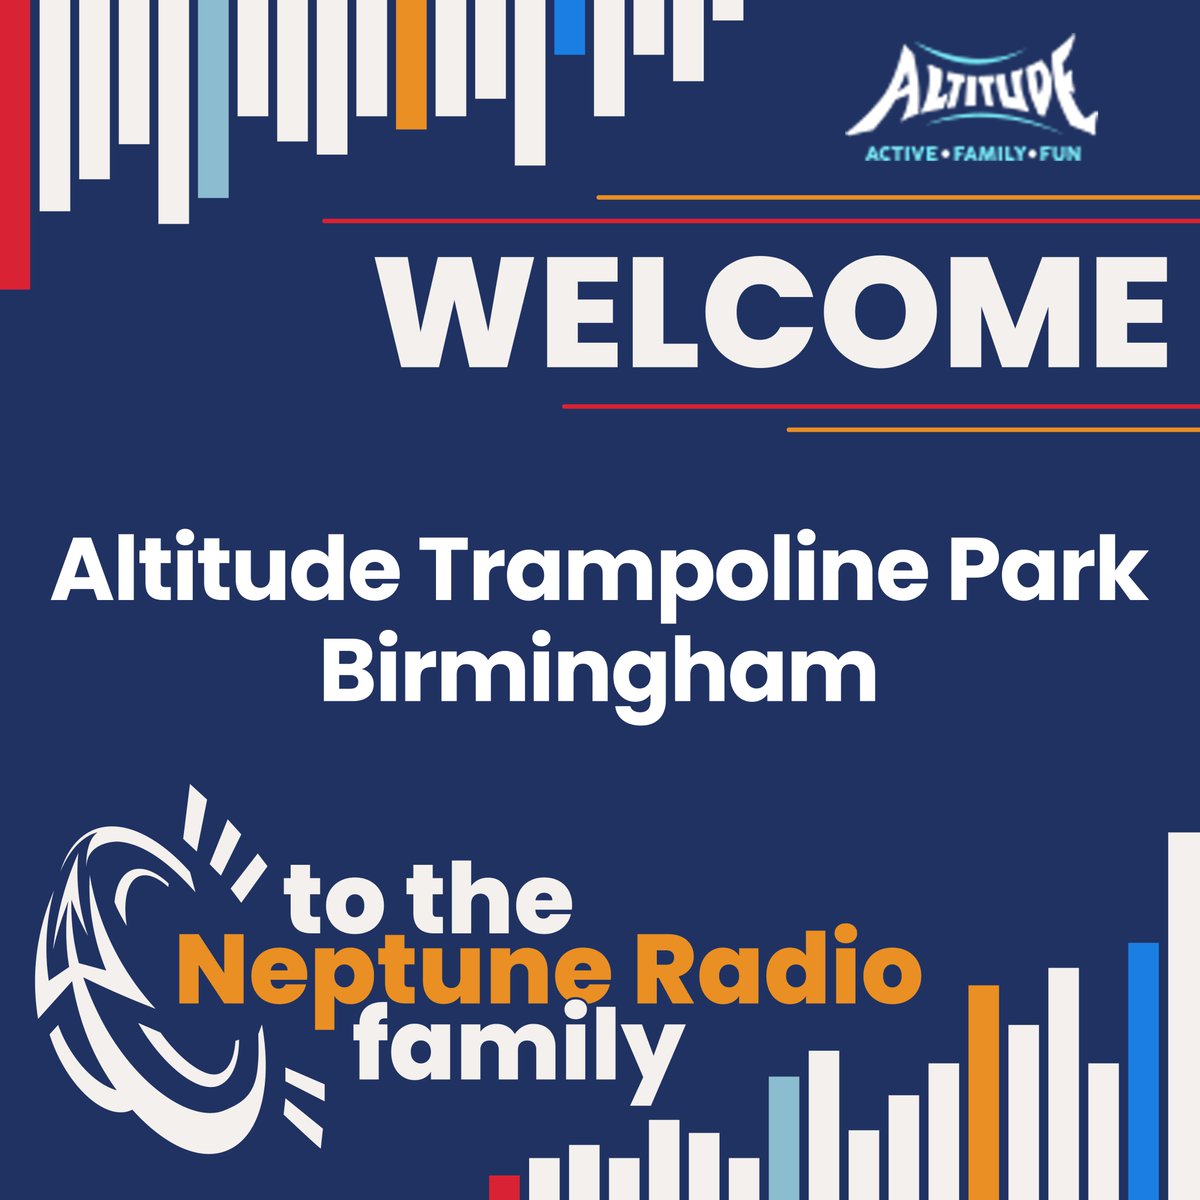 Welcome to the Neptune Radio family, @AltitudePelham! We’re excited to enhance the experience for your guests with 100% lyric-safe music and a professional radio sound!